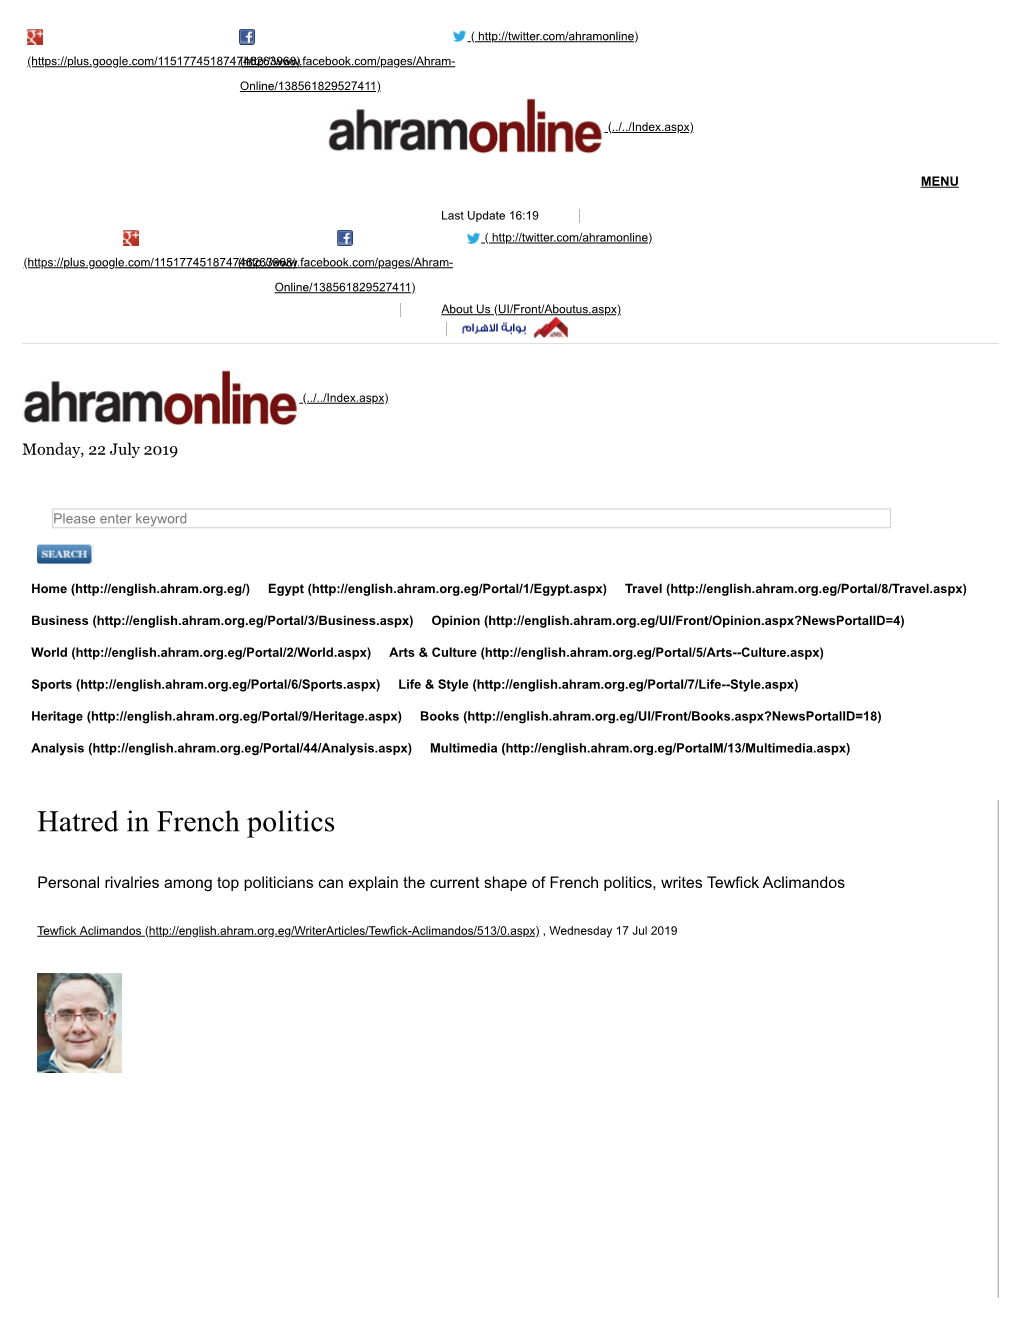 Hatred in French Politics